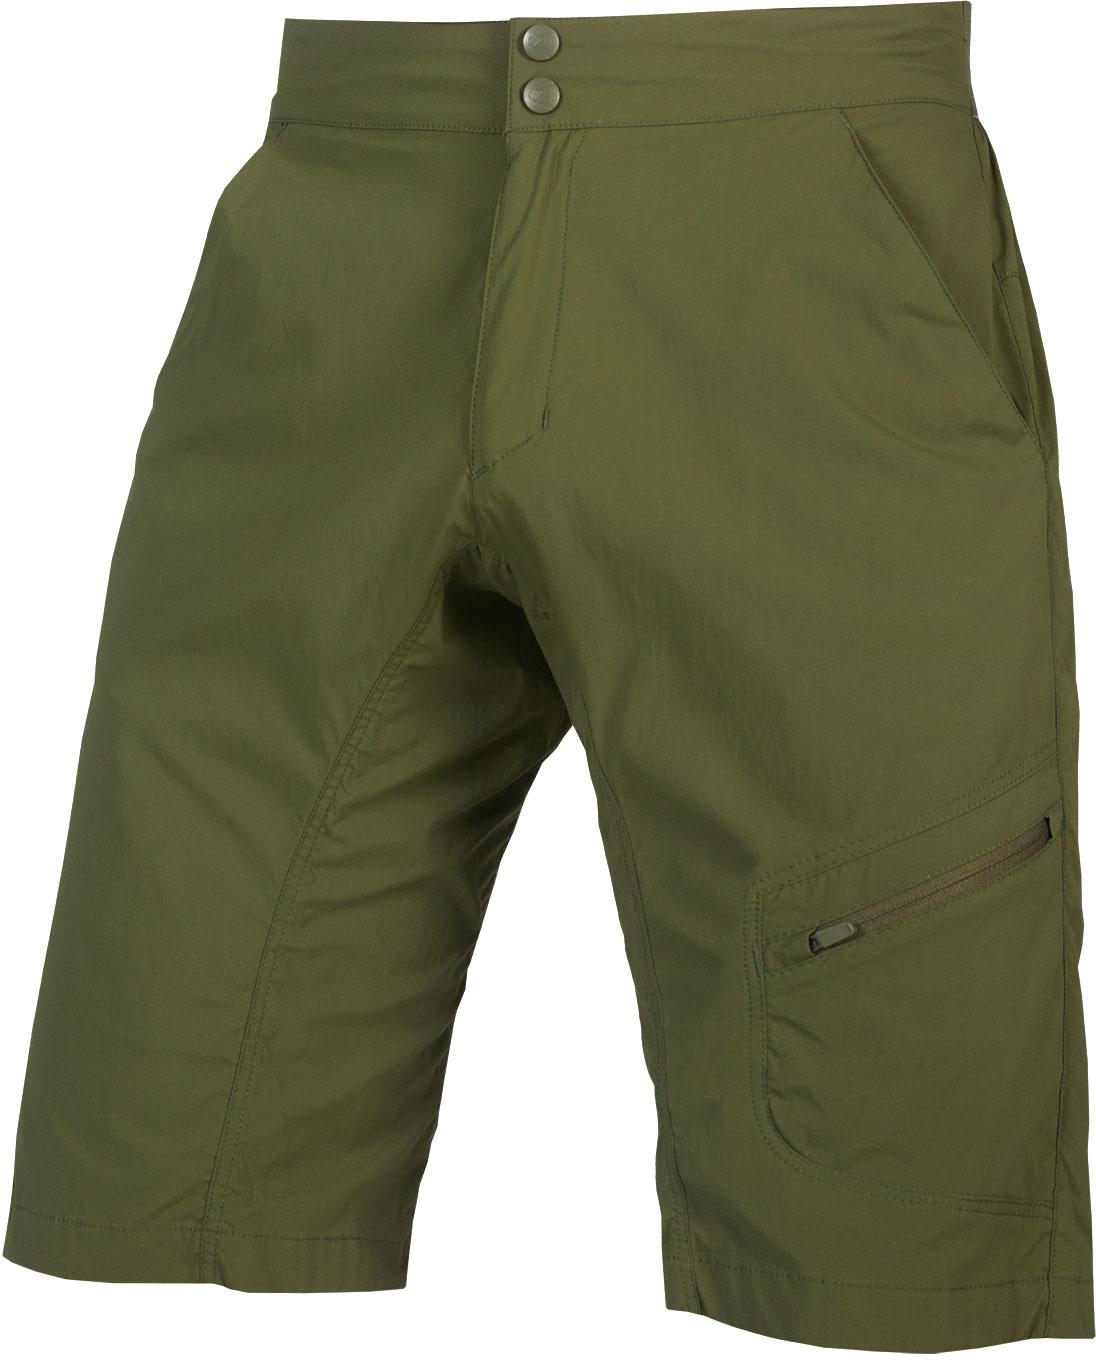 Endura Hummvee Lite Shorts With Liner - Olive Green